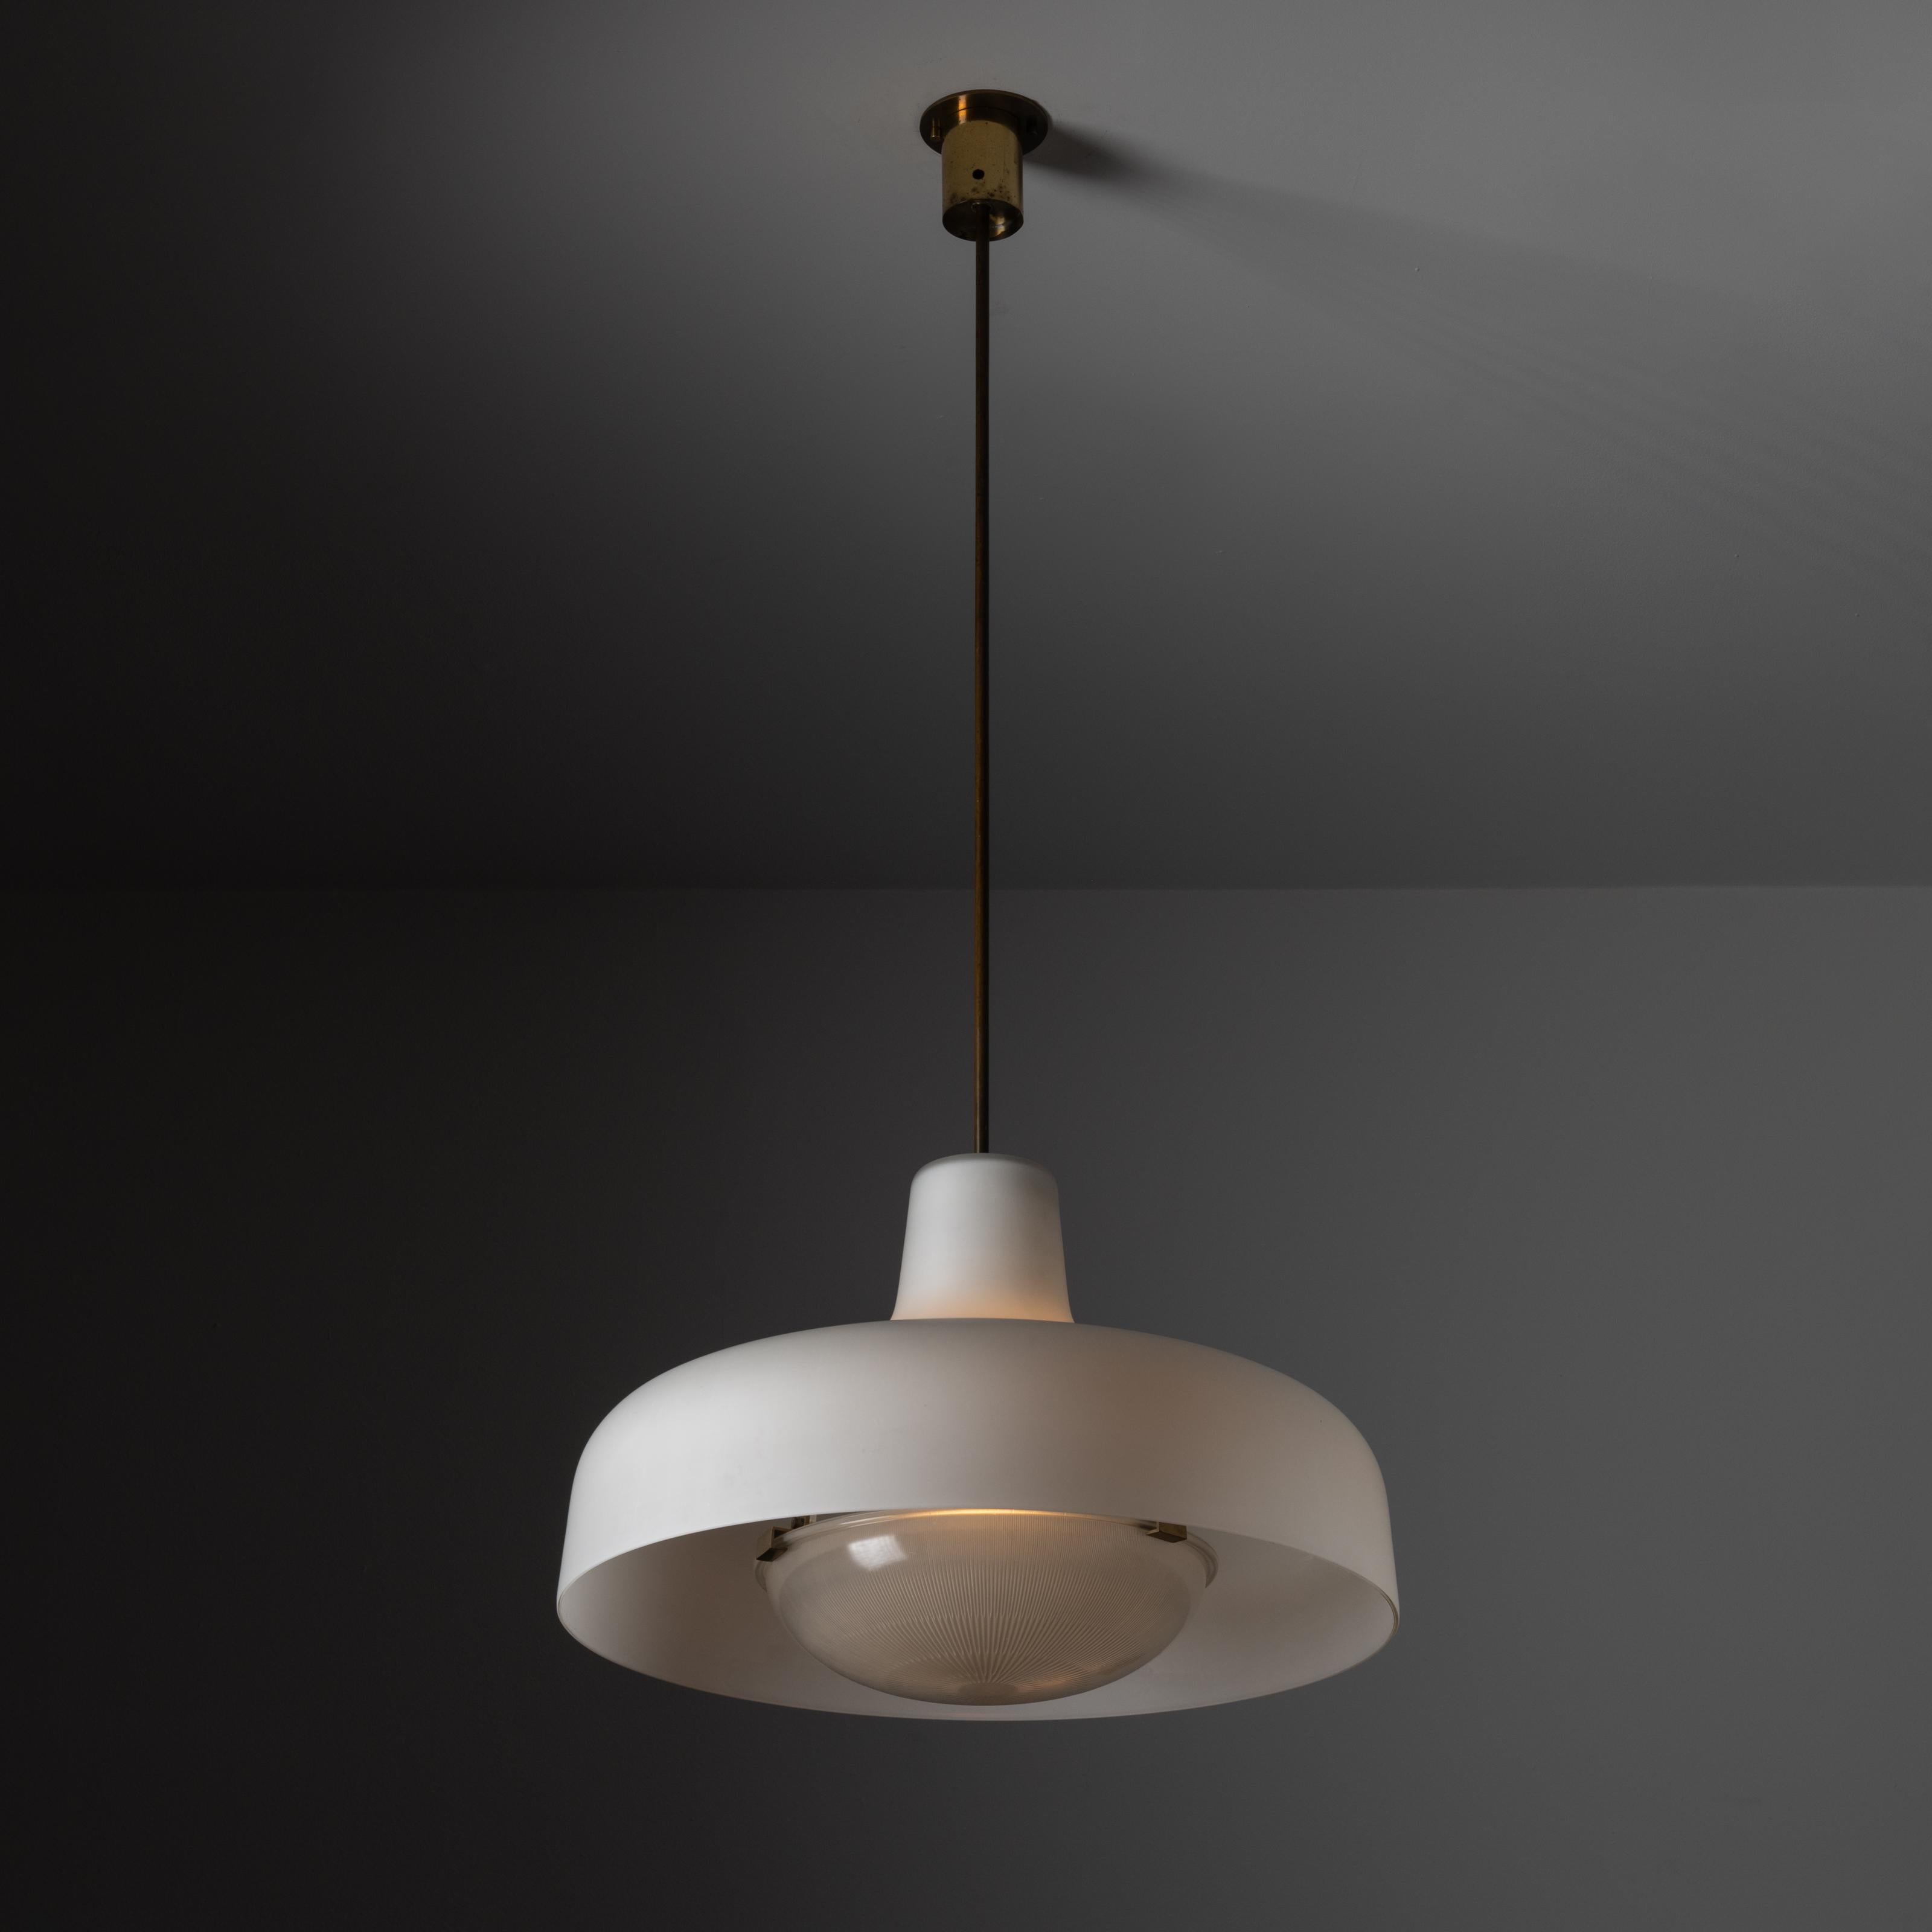 Model LS7 'Paolina' ceiling light by Ignazio Gardella for Azucena. Designed and manufactured in Italy, 1958. Exterior white glass, brass fixture stem and canopy, with reeded glass diffuser at the bottom. Original canopy, custom brass backplate. The